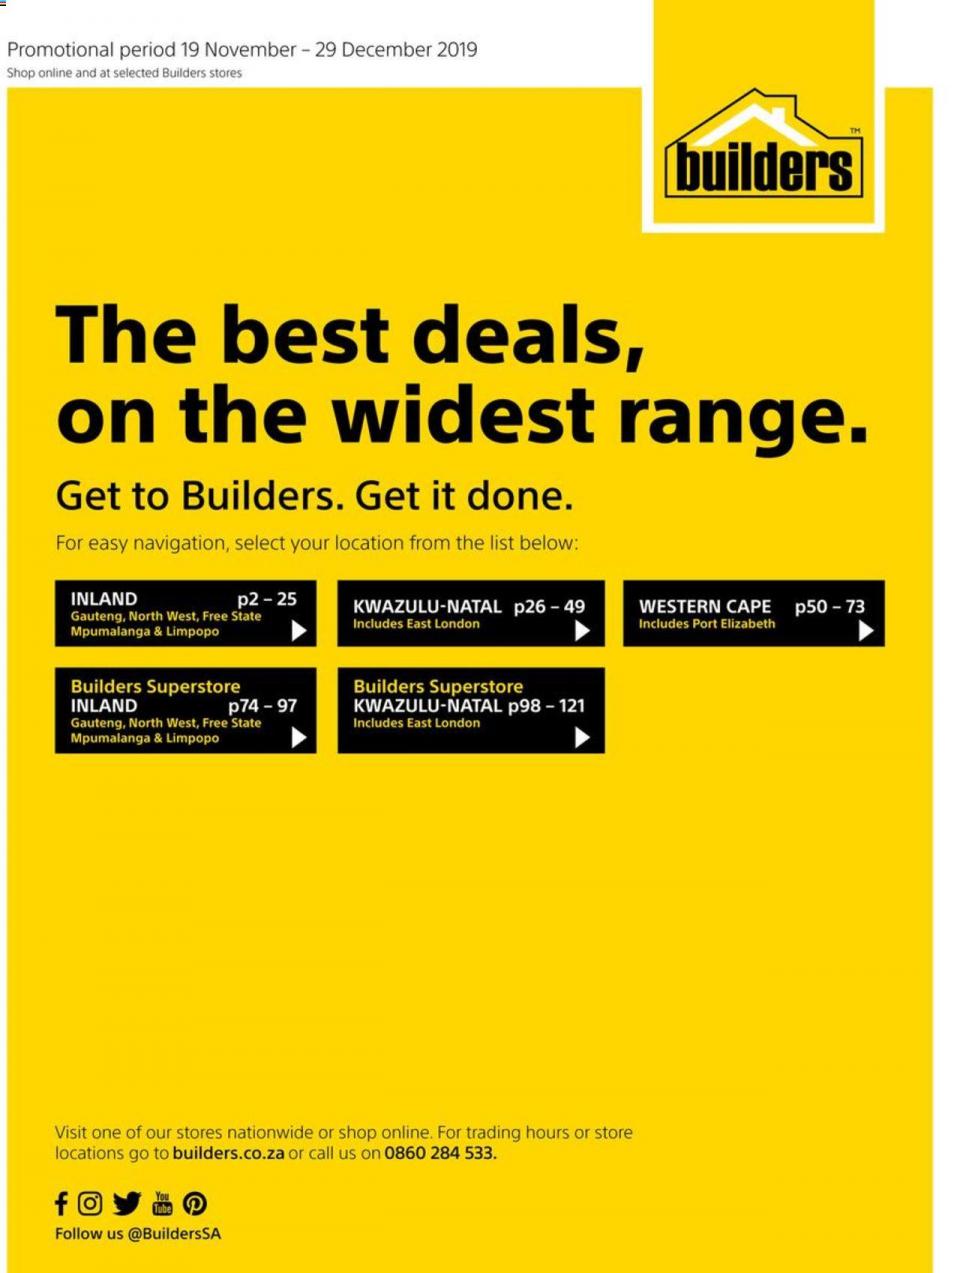 builders warehouse specials the best deals on the widest range 20 november 2019